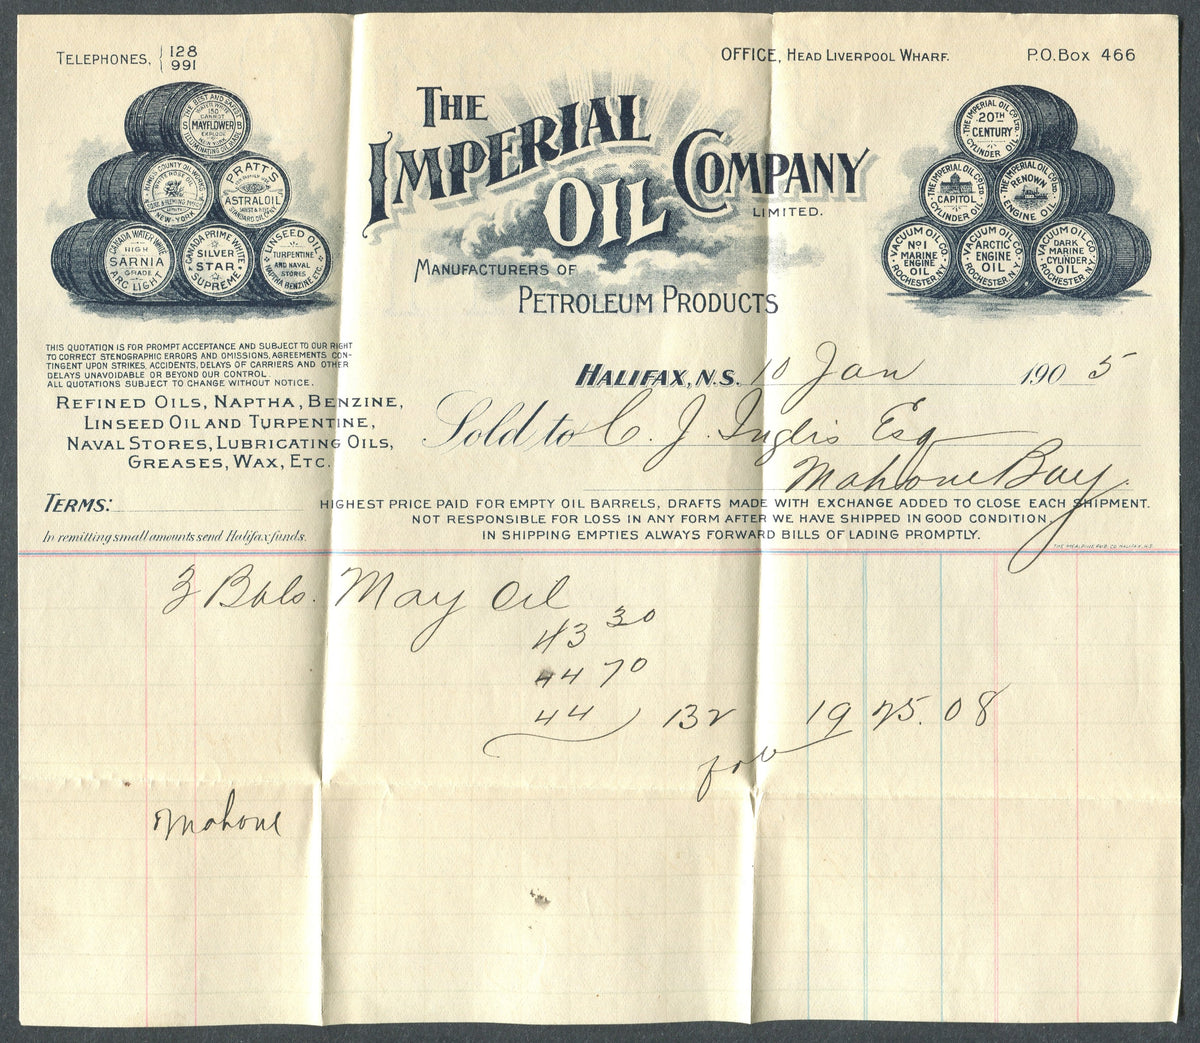 0090NS1903 - #90 on &#39;IMPERIAL OIL COMPANY&#39; Advertising Cover